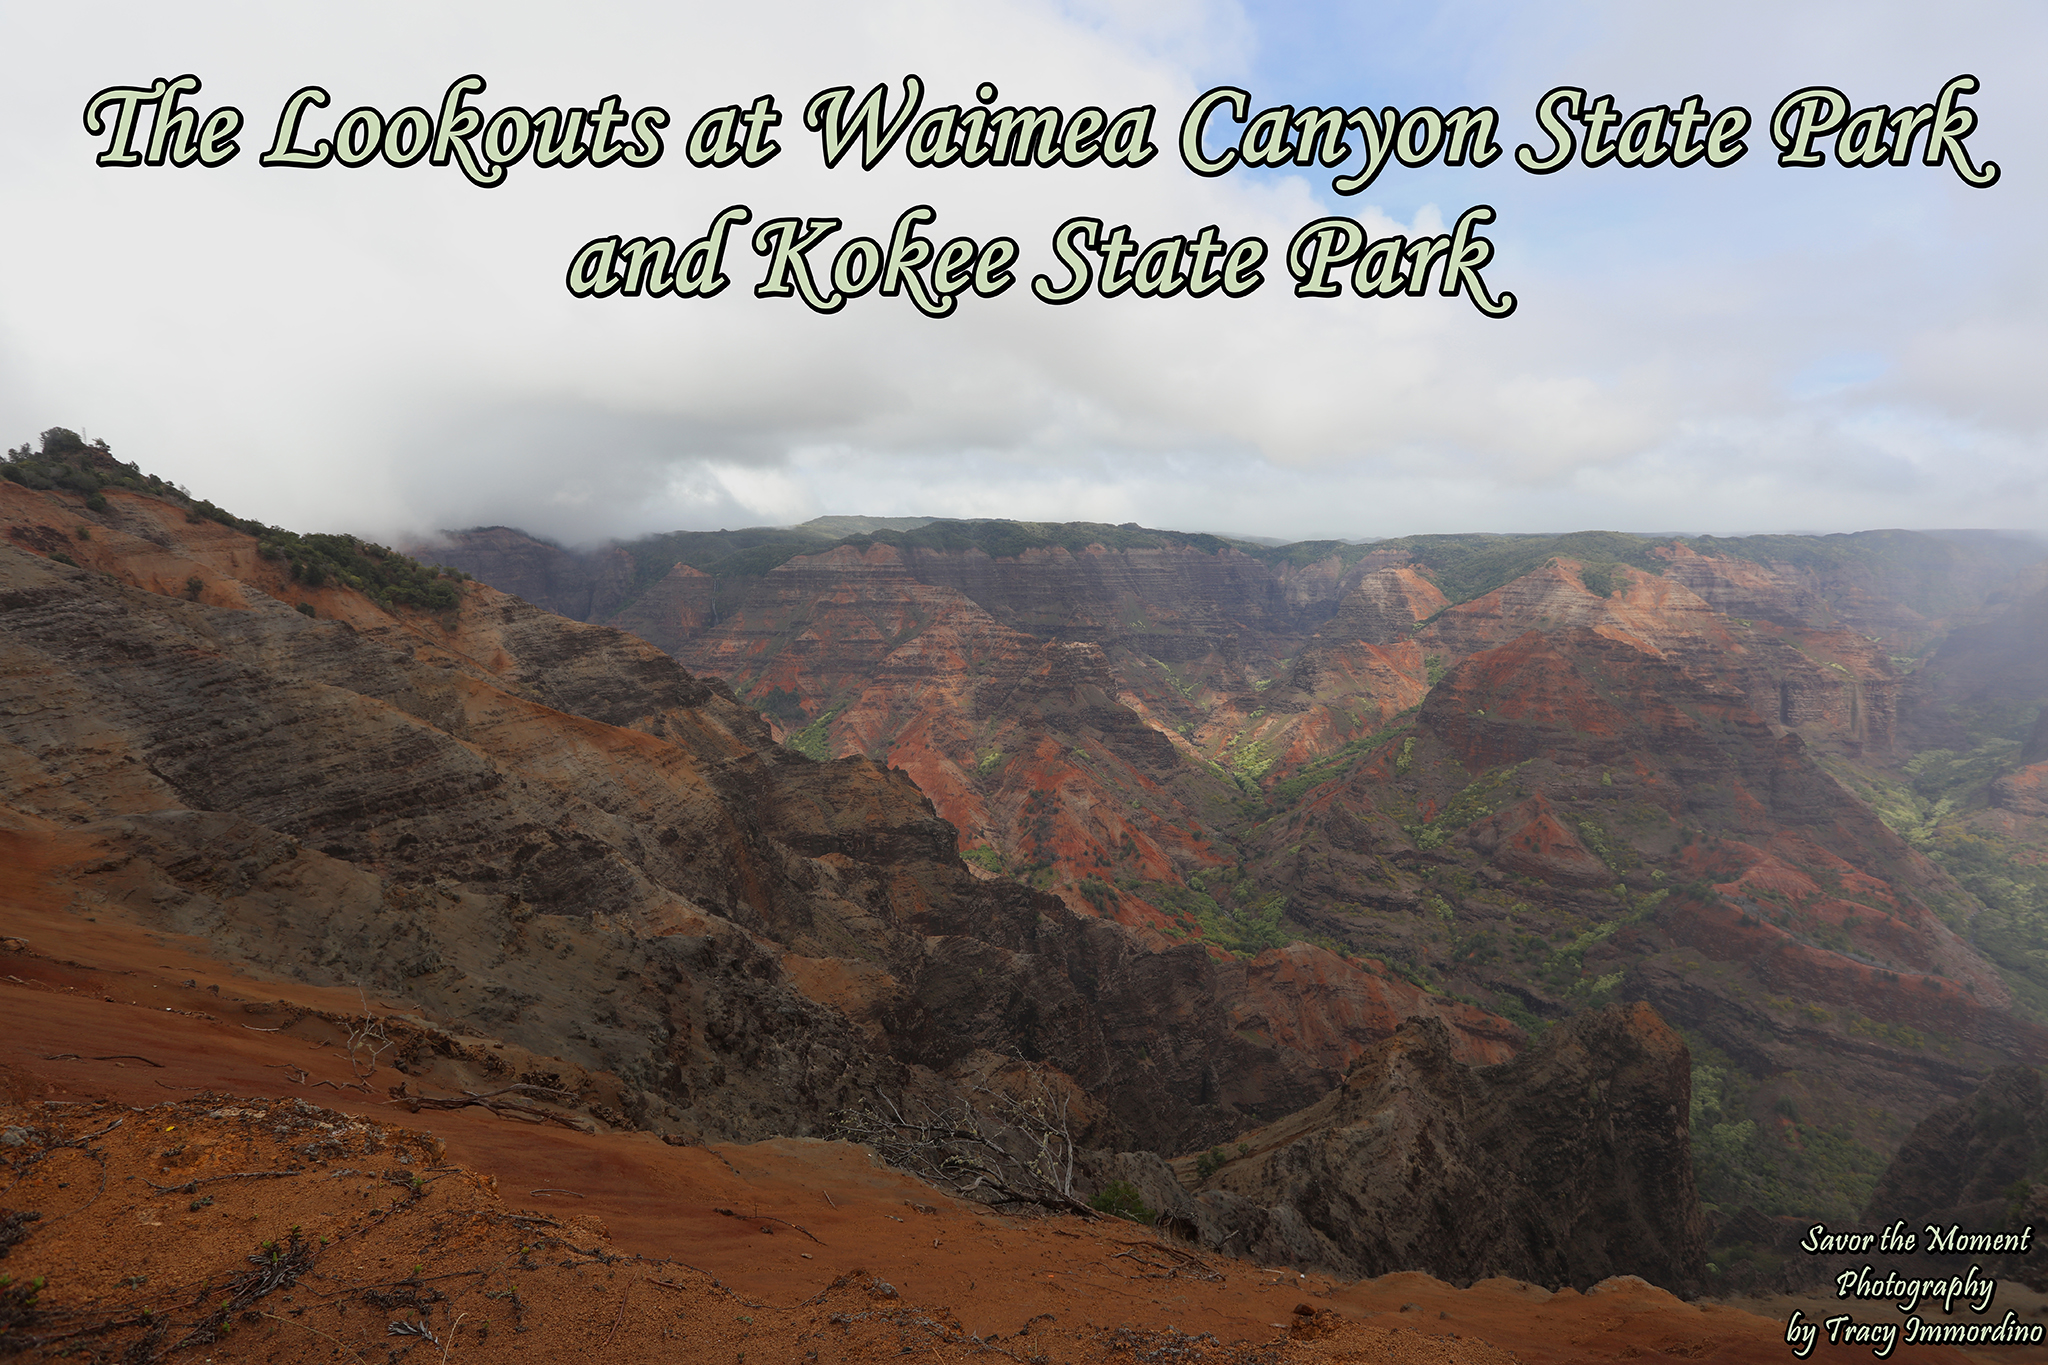 Lookouts at Waimea Canyon State Park and Kokee State Park in Kauai